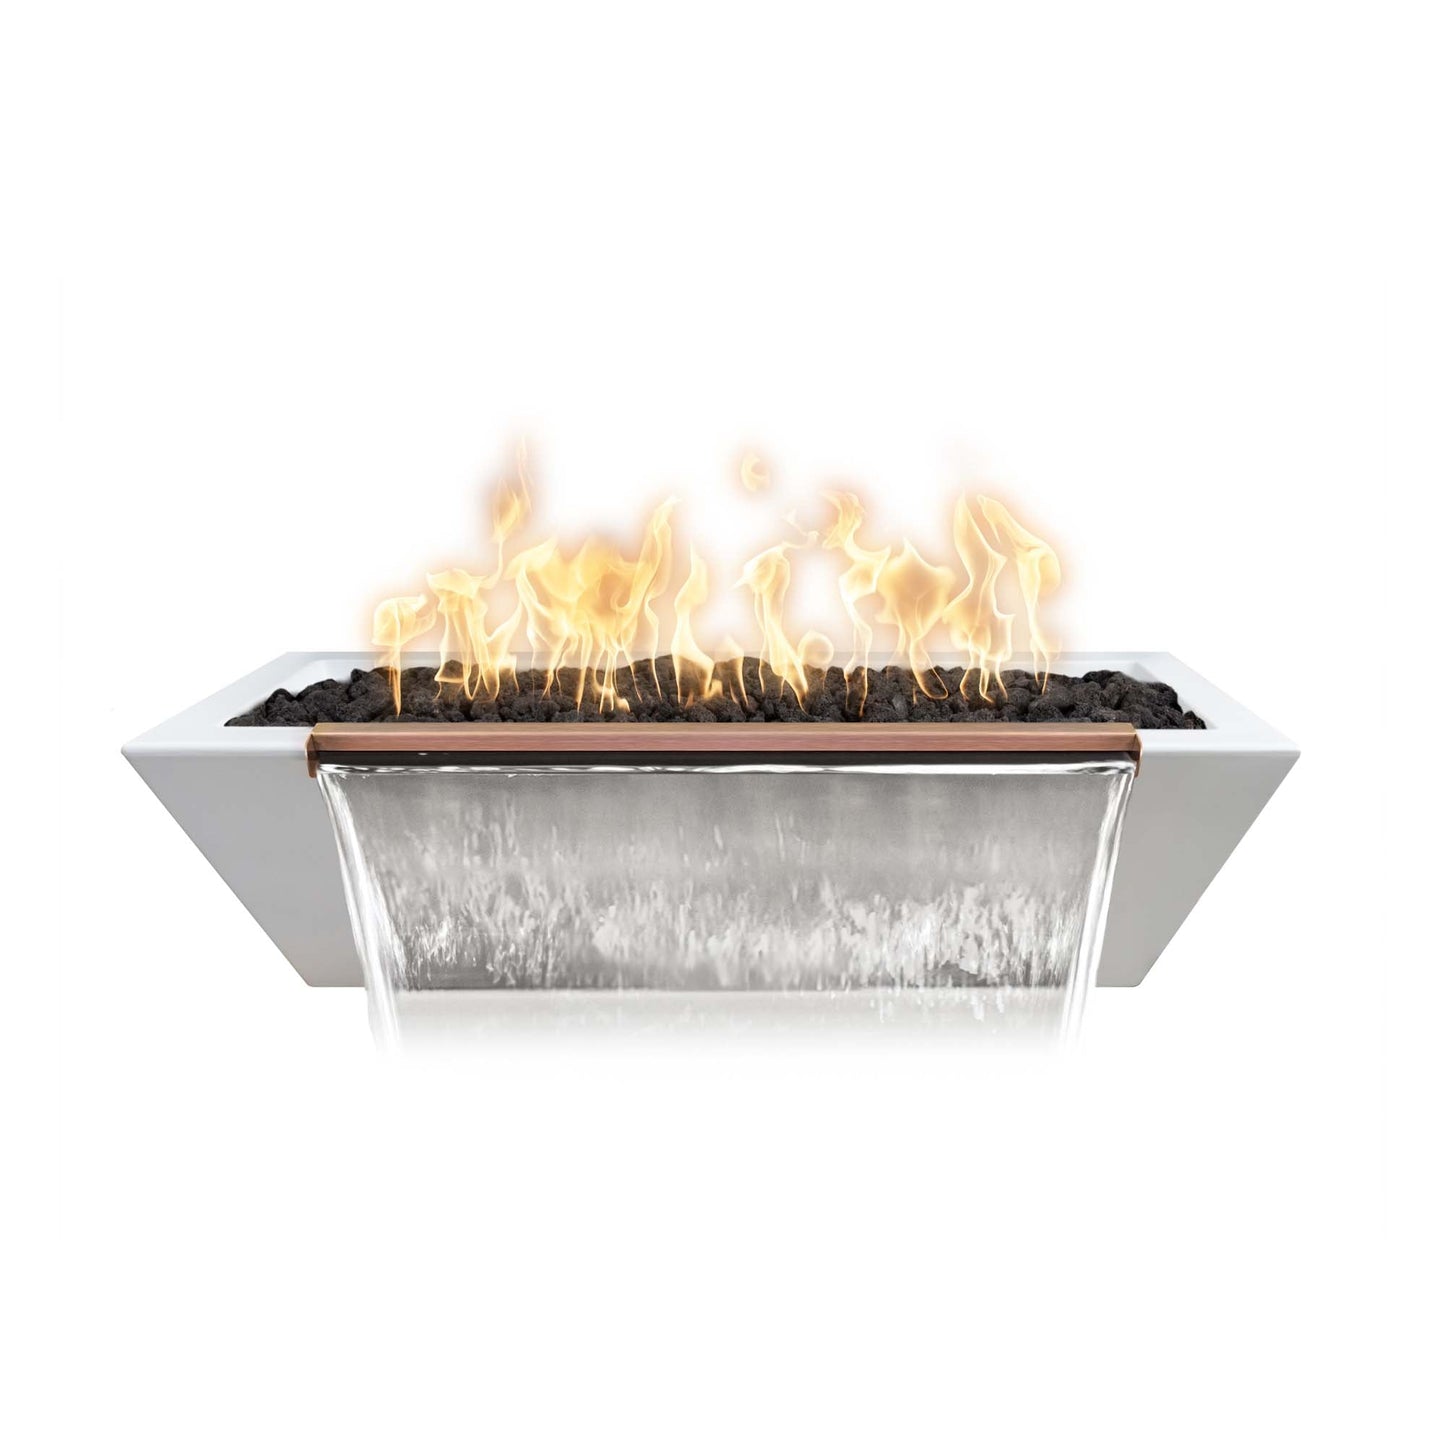 The Outdoor Plus Linear Maya 60" Metallic Slate GFRC Concrete Liquid Propane Fire & Water Bowl with Match Lit with Flame Sense Ignition